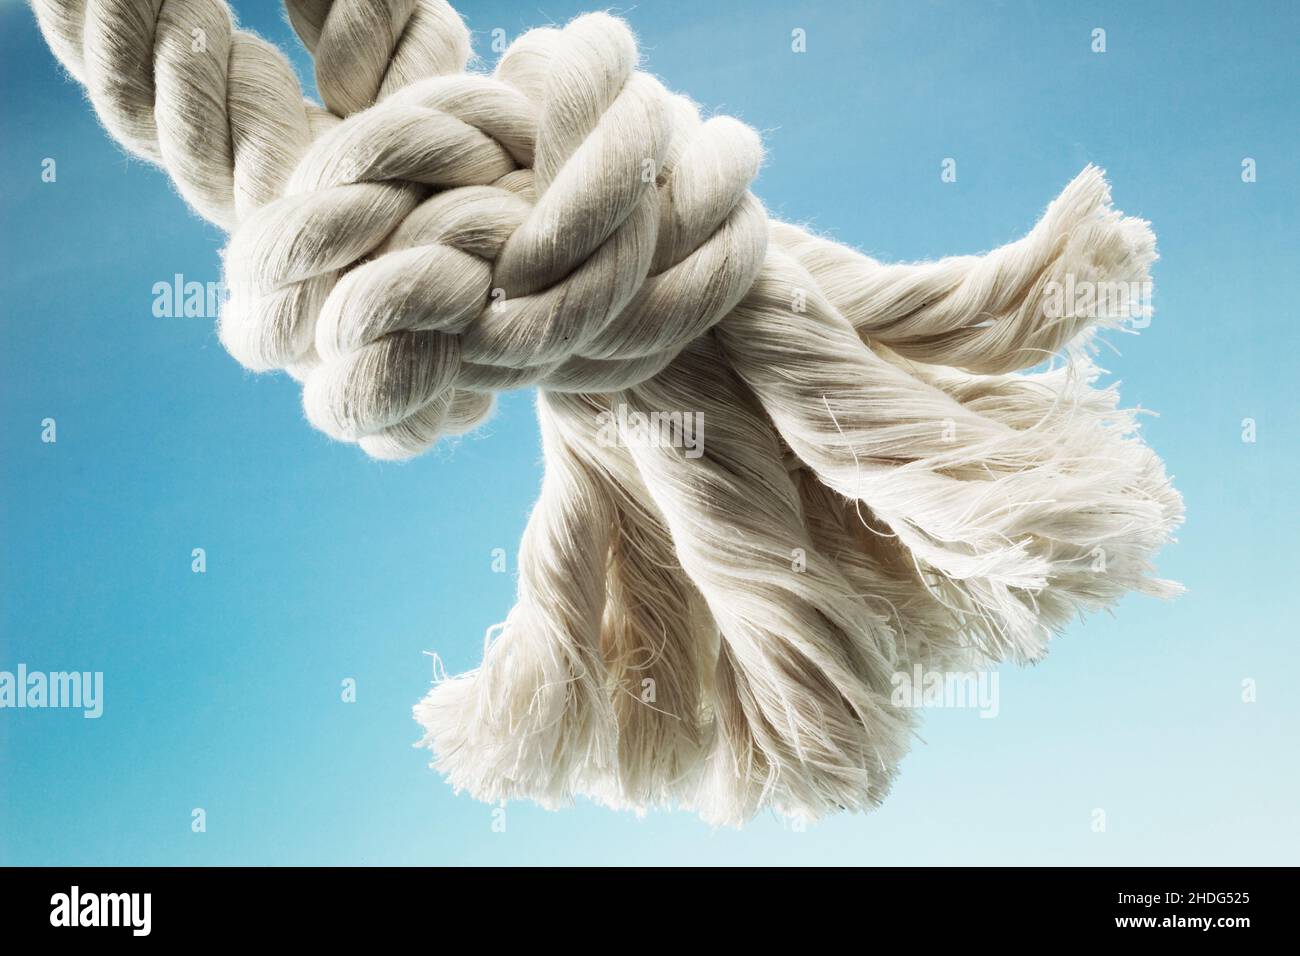 rope, braided, rope end, ropes, braideds, rope ends Stock Photo